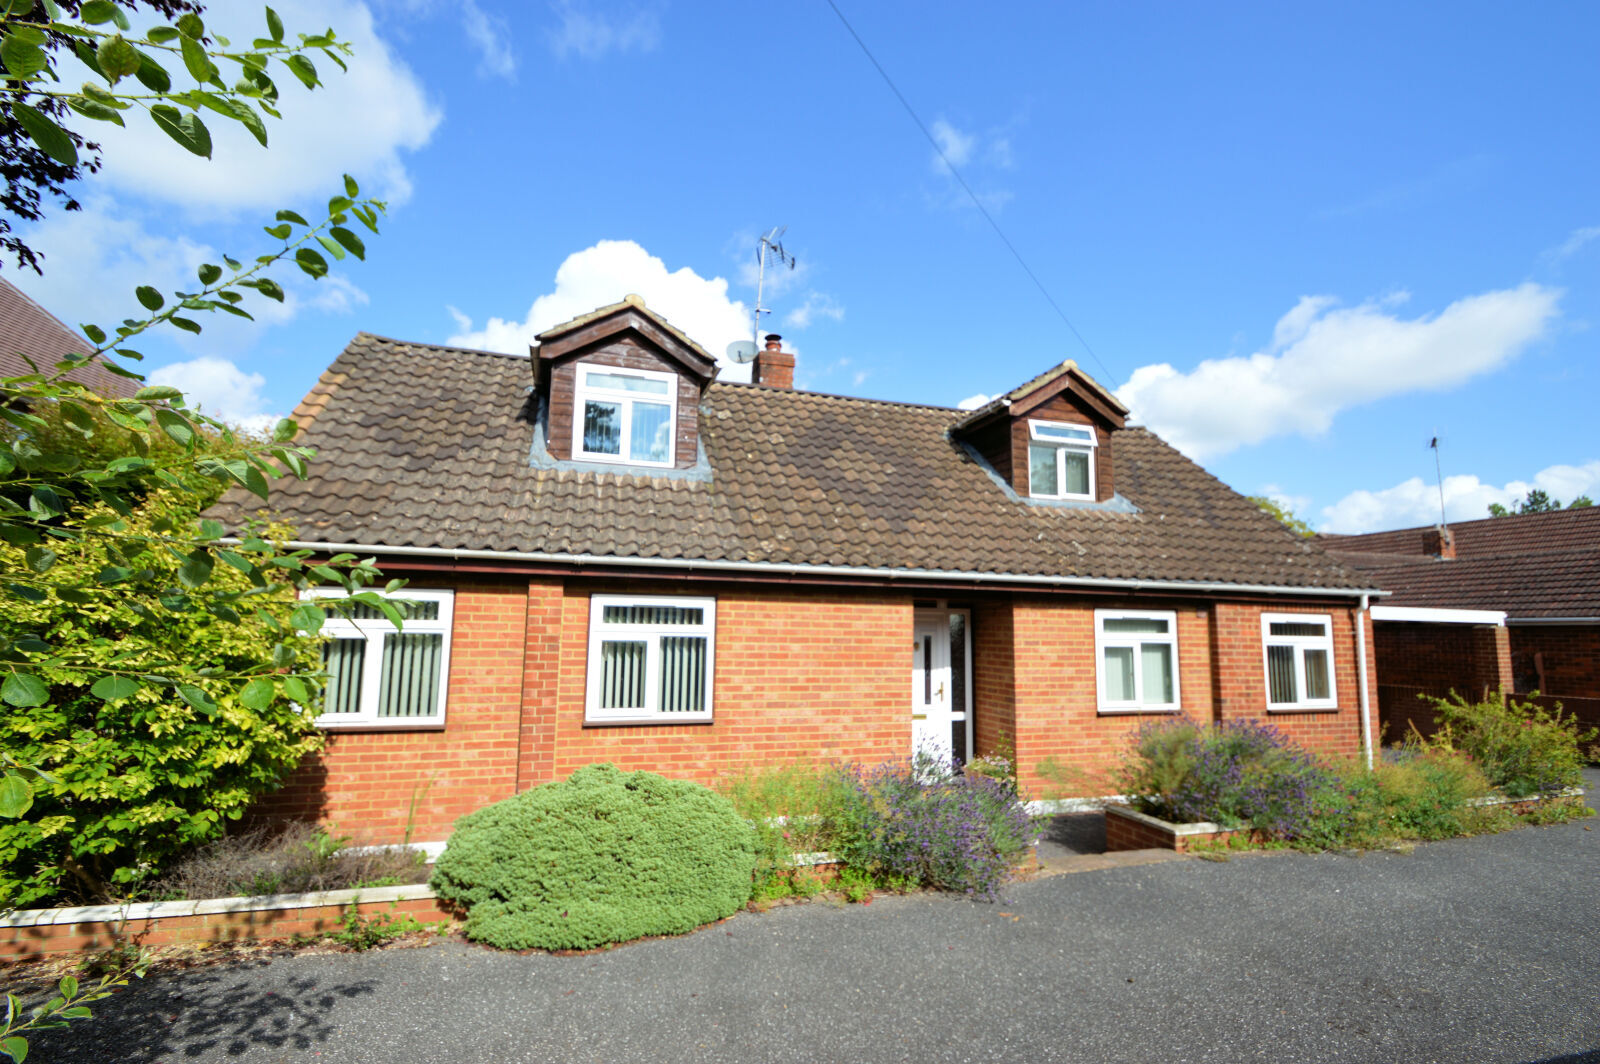 5 bedroom detached house for sale Icknield Road, Goring On Thames, RG8, main image